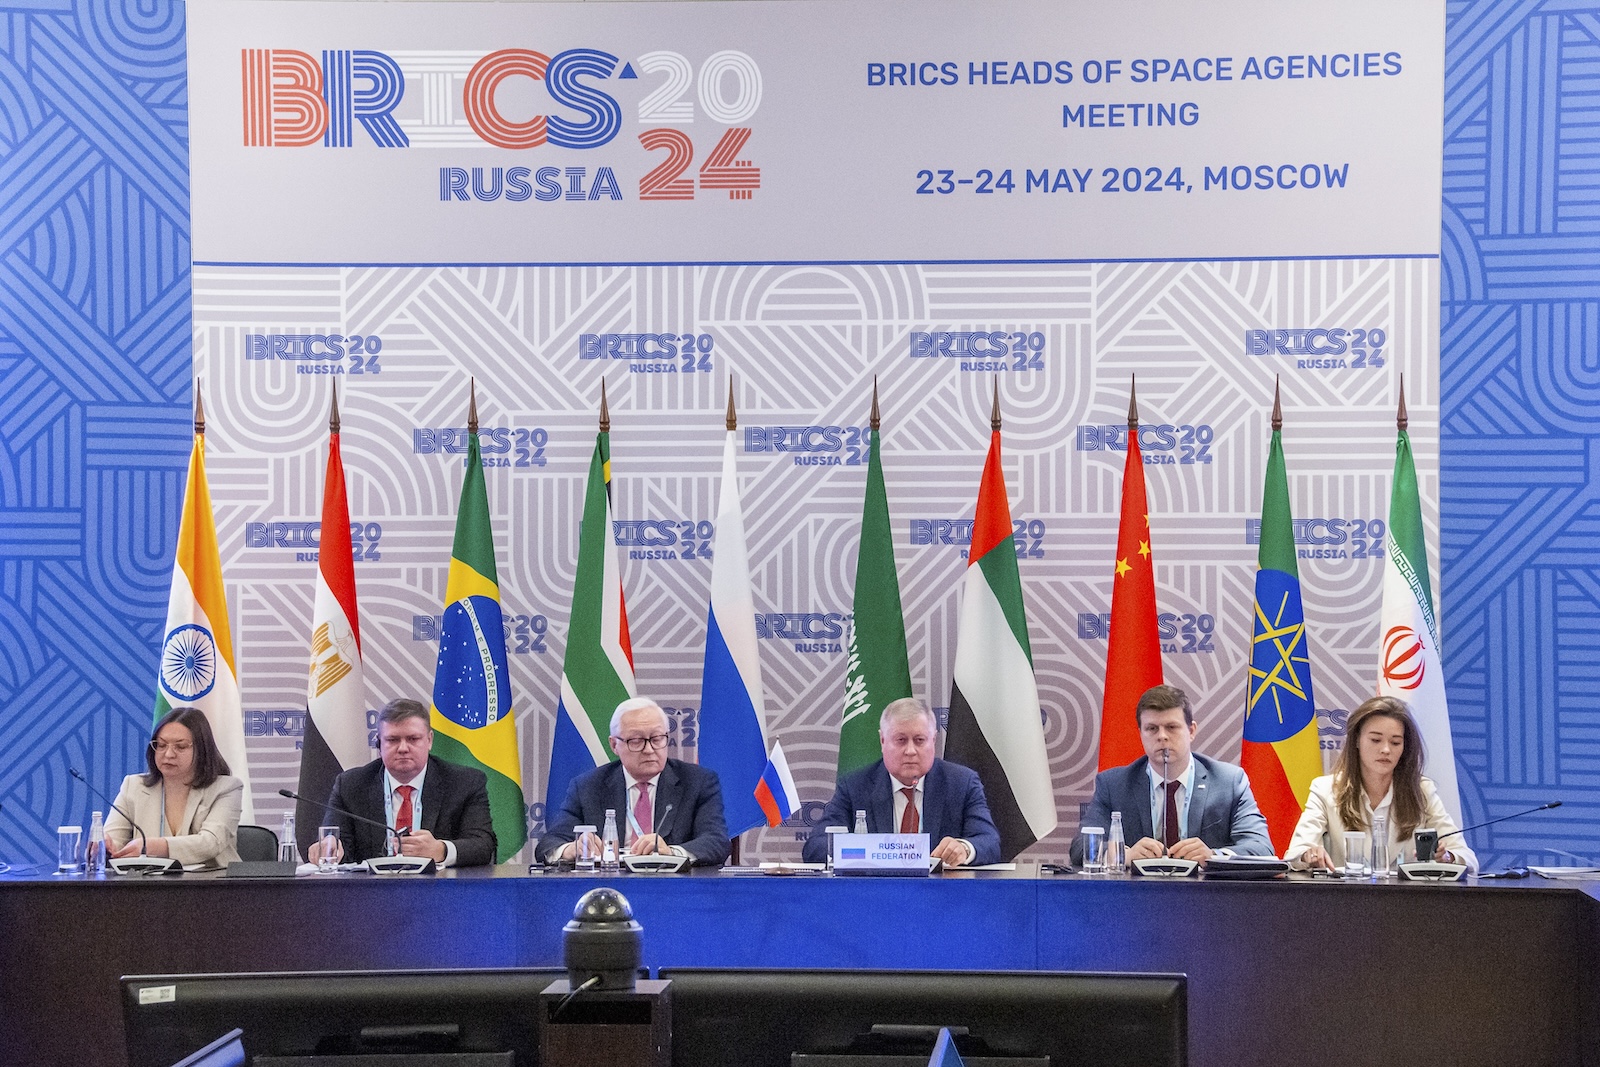 epa11363464 A handout photo made available by Roscosmos press service shows participants attending a meeting of heads of space agencies of BRICS member countries in Moscow, Russia, 23 May 2024. The desire of a number of Western countries to turn space into an arena for possible military operations is particularly alarming, said Roscosmos General Director Yuri Borisov. Deputy Foreign Minister of the Russian Federation Sergei Ryabkov said that Moscow is counting on the support of the BRICS countries for Russian initiatives on the use of space for peaceful purposes.  EPA/ROSCOSMOS PRESS SERVICE HANDOUT   HANDOUT EDITORIAL USE ONLY/NO SALES HANDOUT EDITORIAL USE ONLY/NO SALES